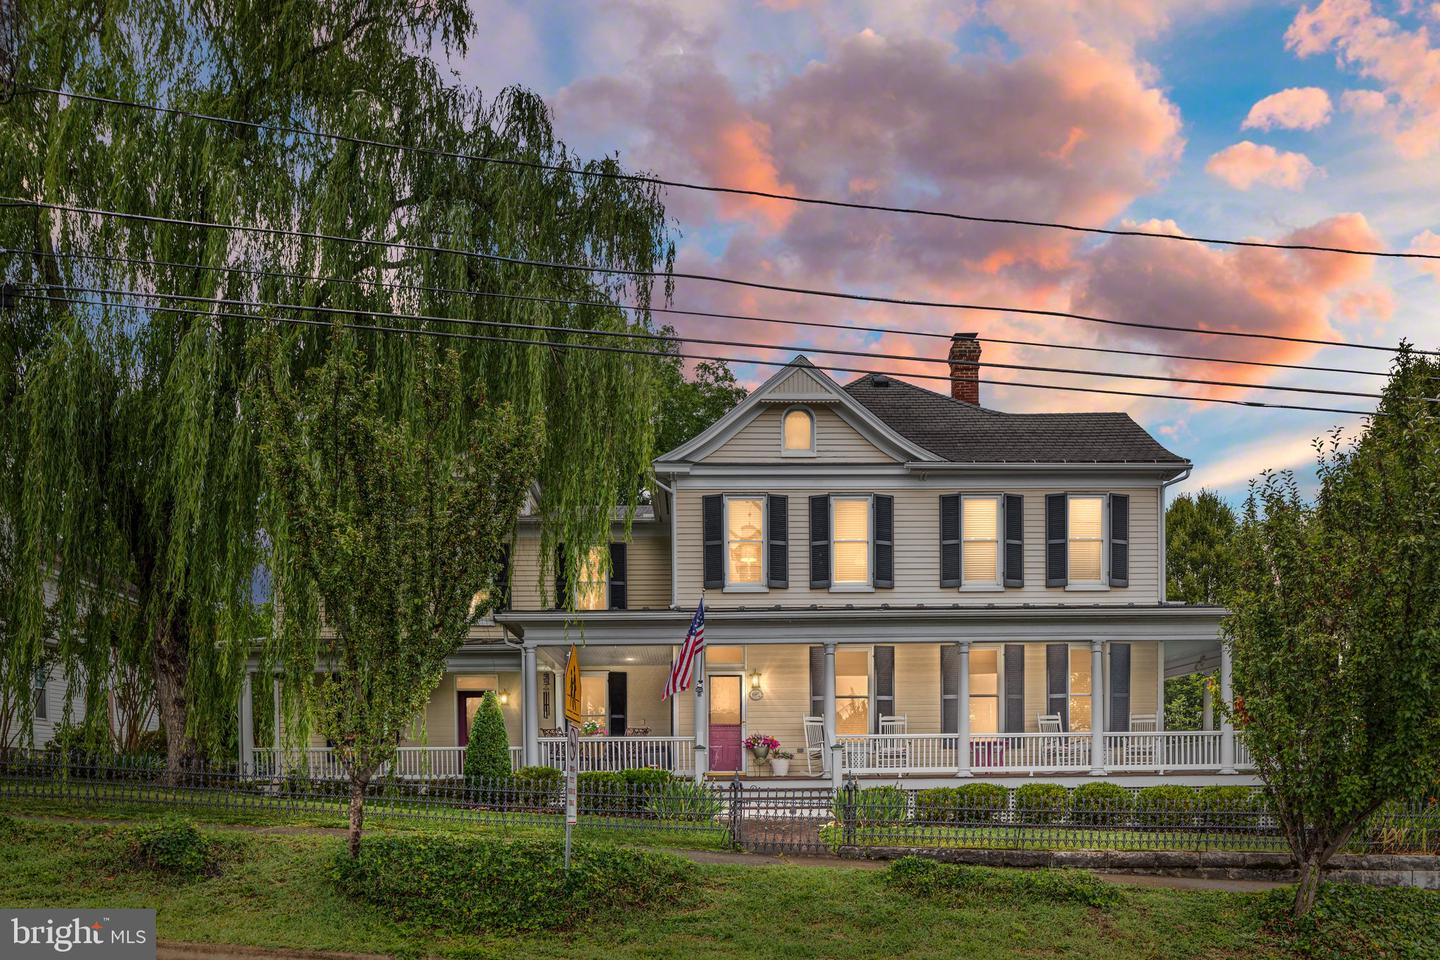 c.1850 in Uniontown, PA - Old House Dreams